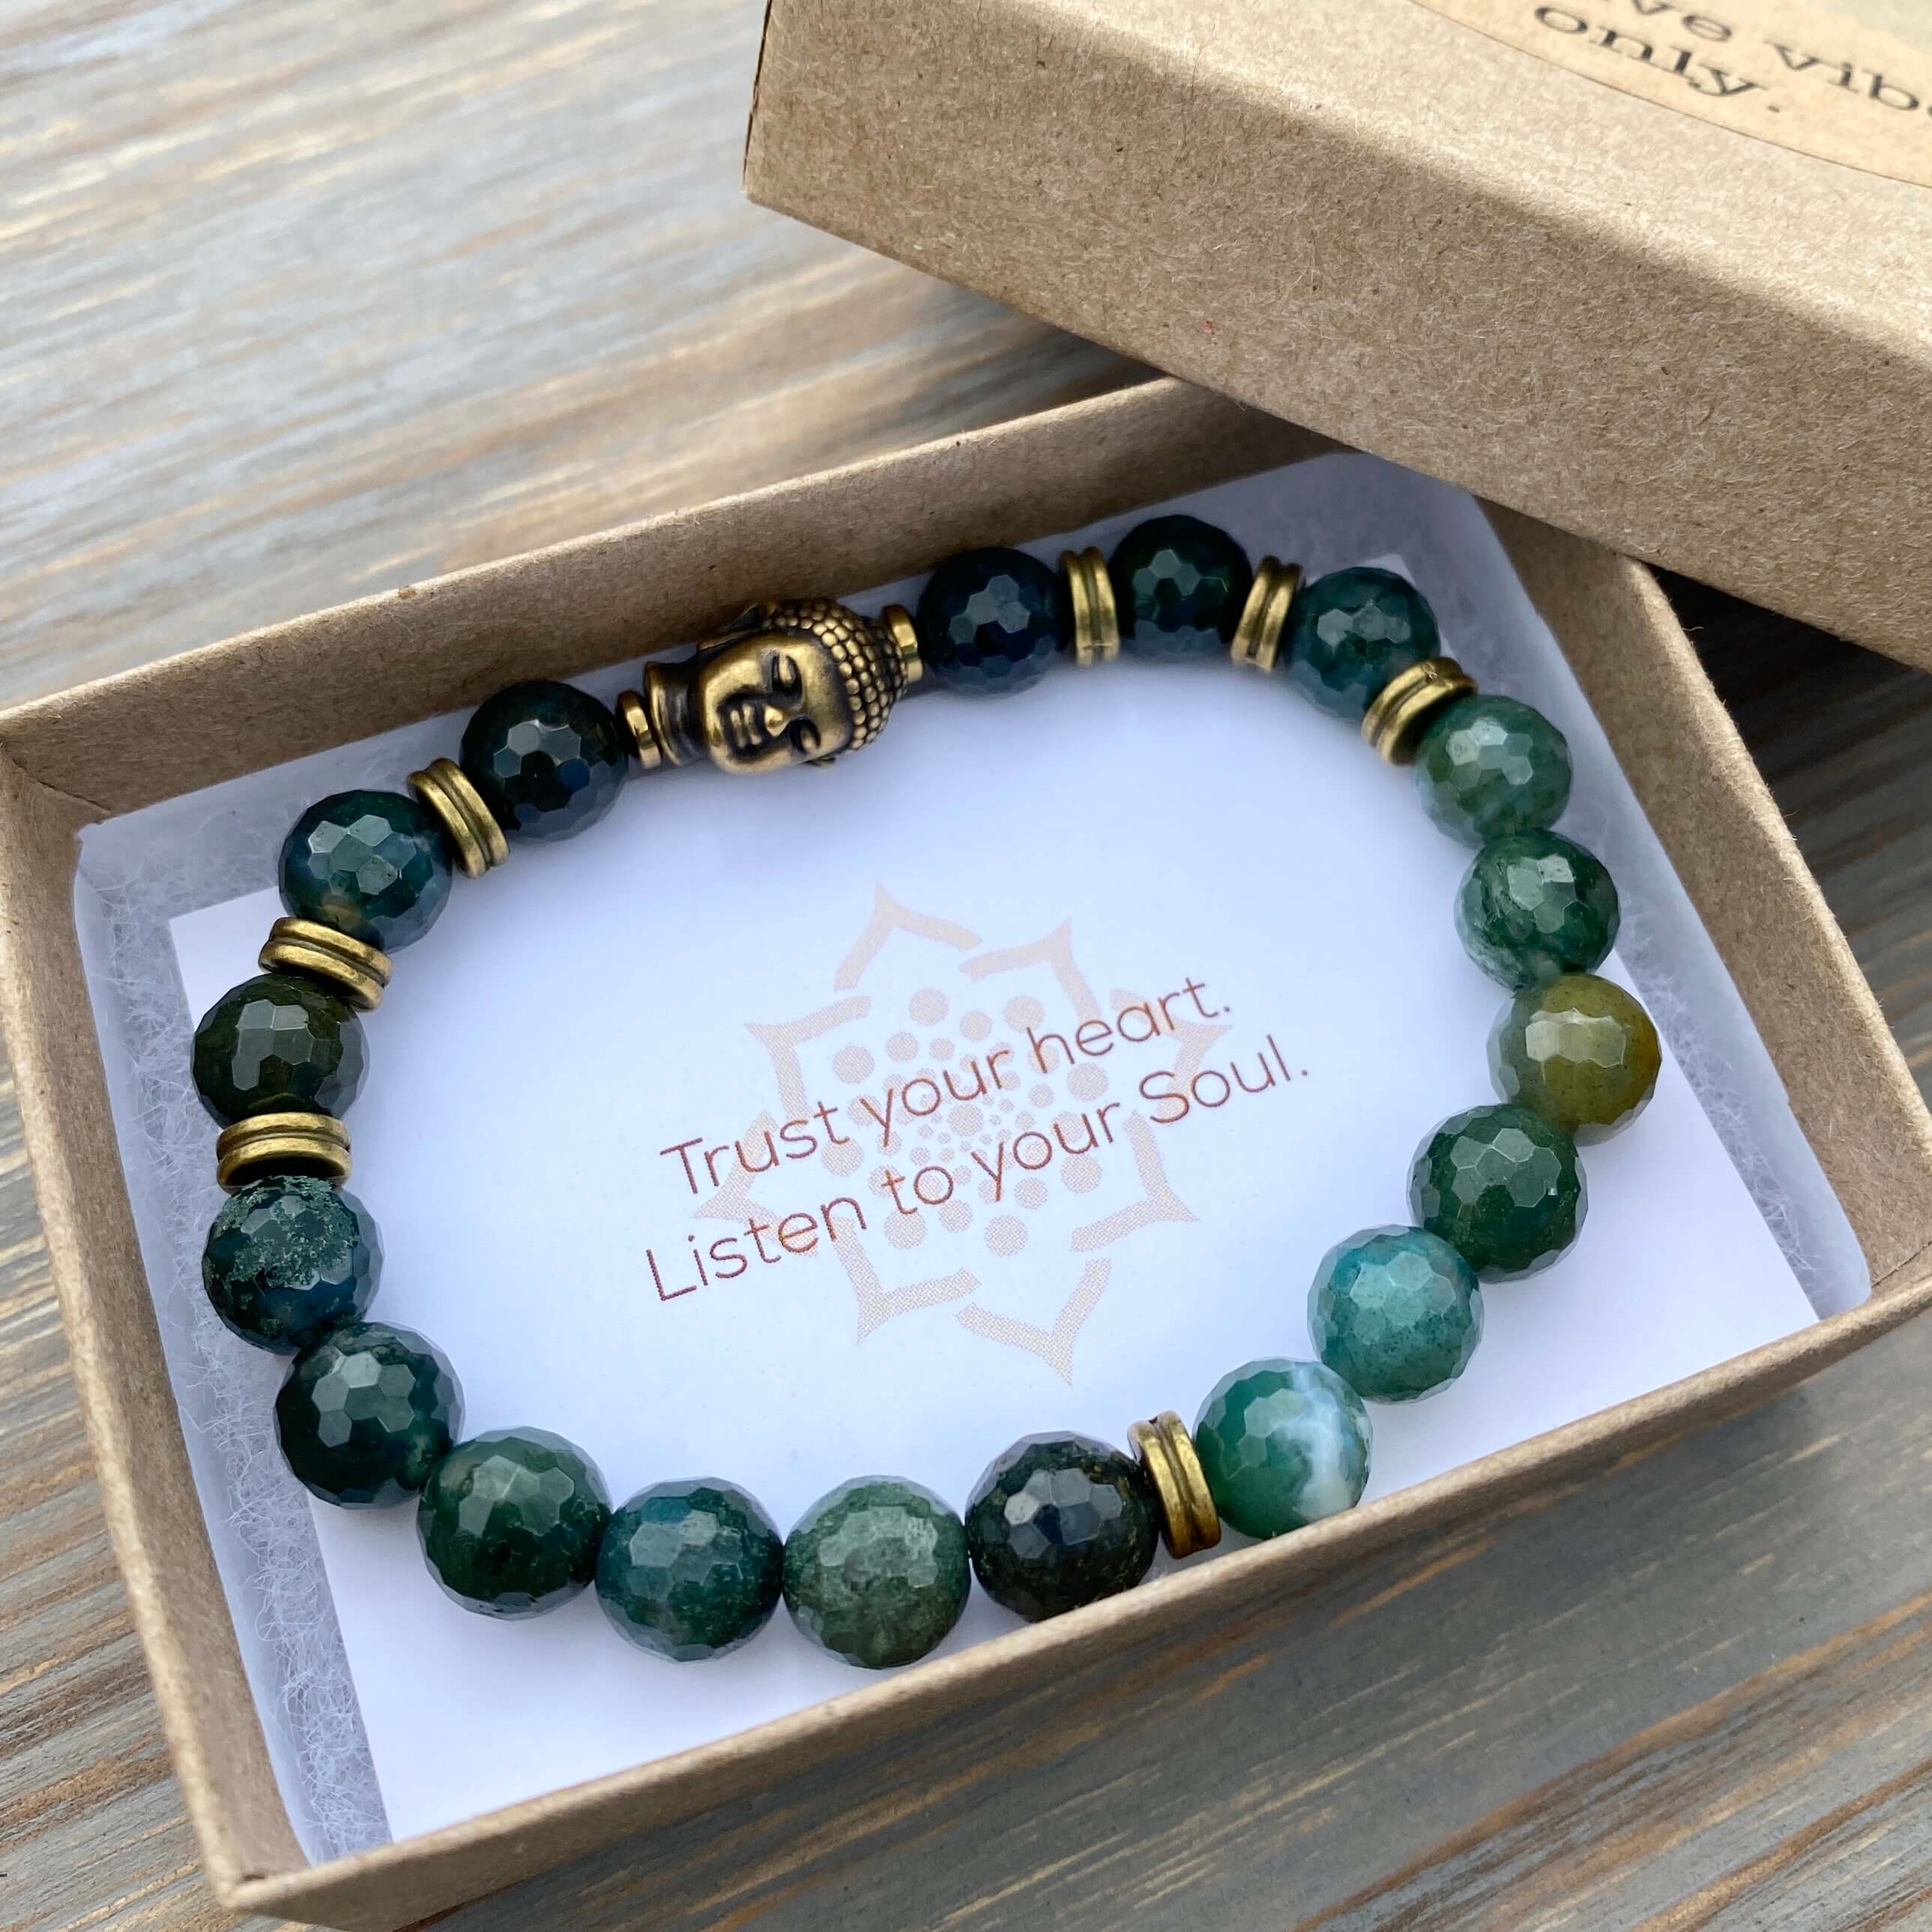 The Law of Attraction Buddha Bracelet